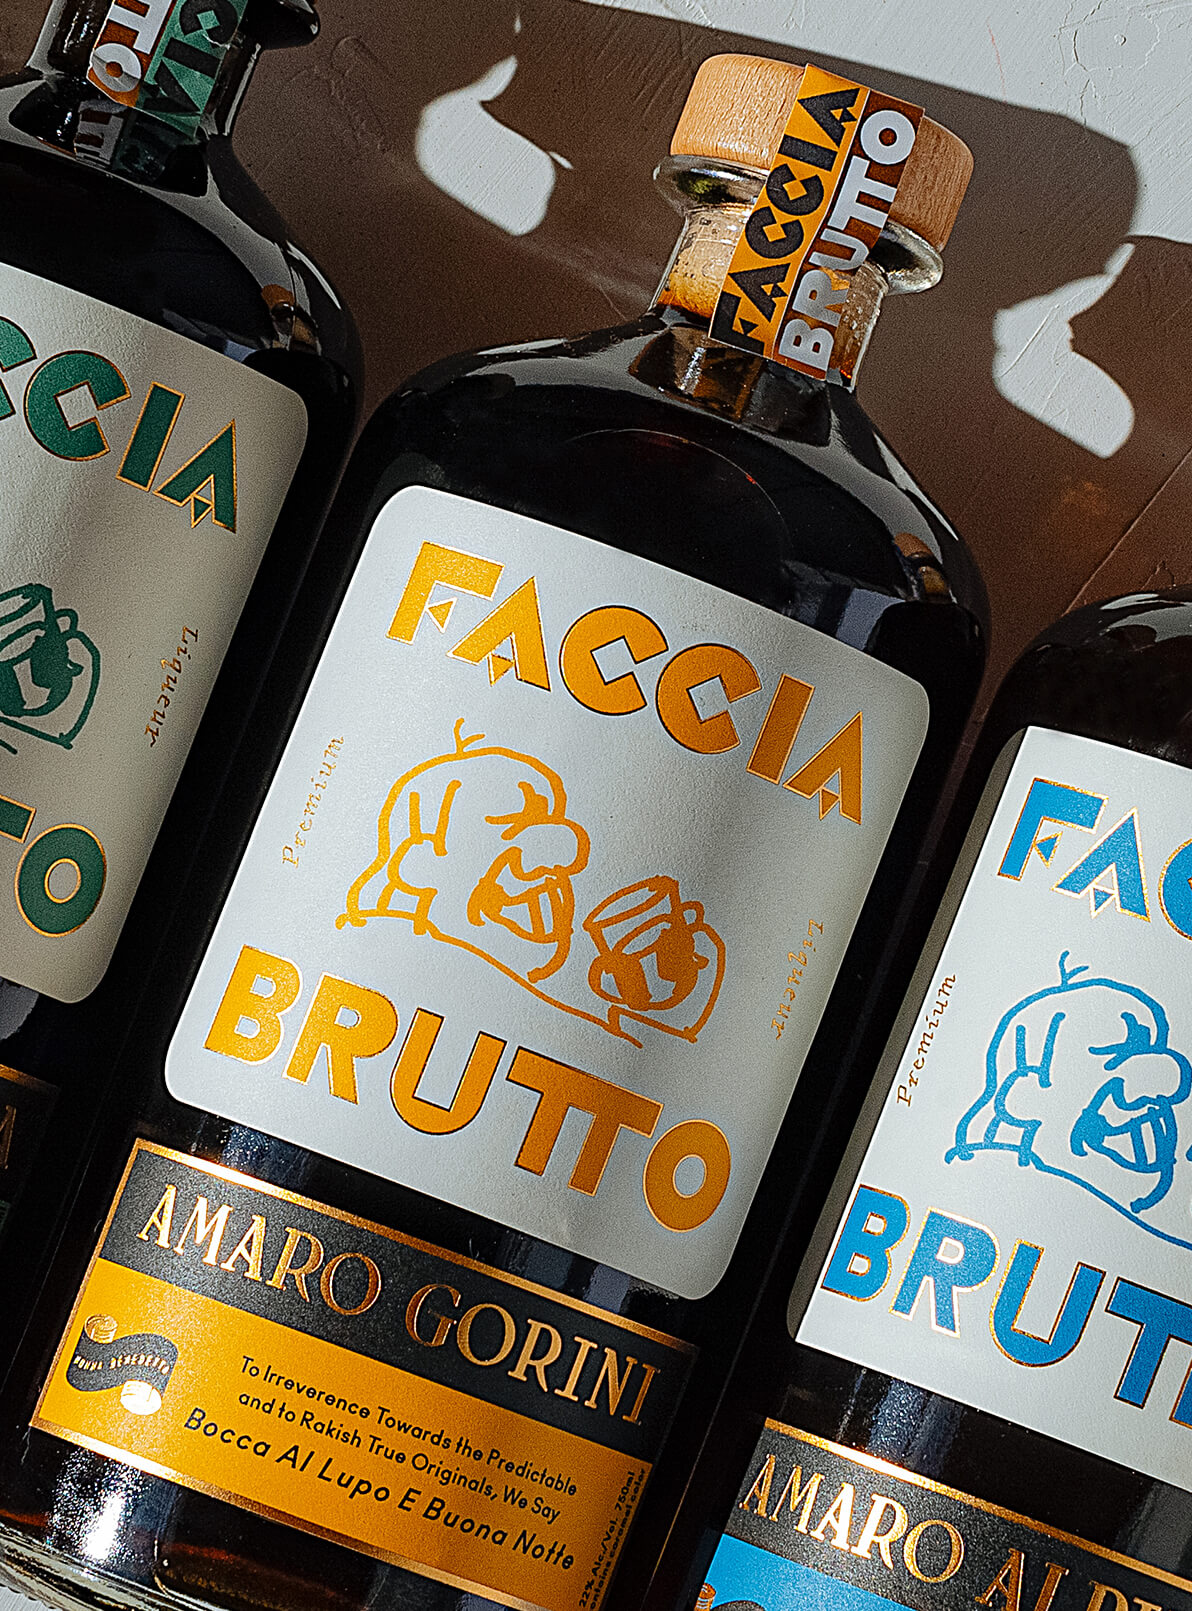 Bottles of Faccia Brutto laid down on white painted background featuring Amaro Gorini